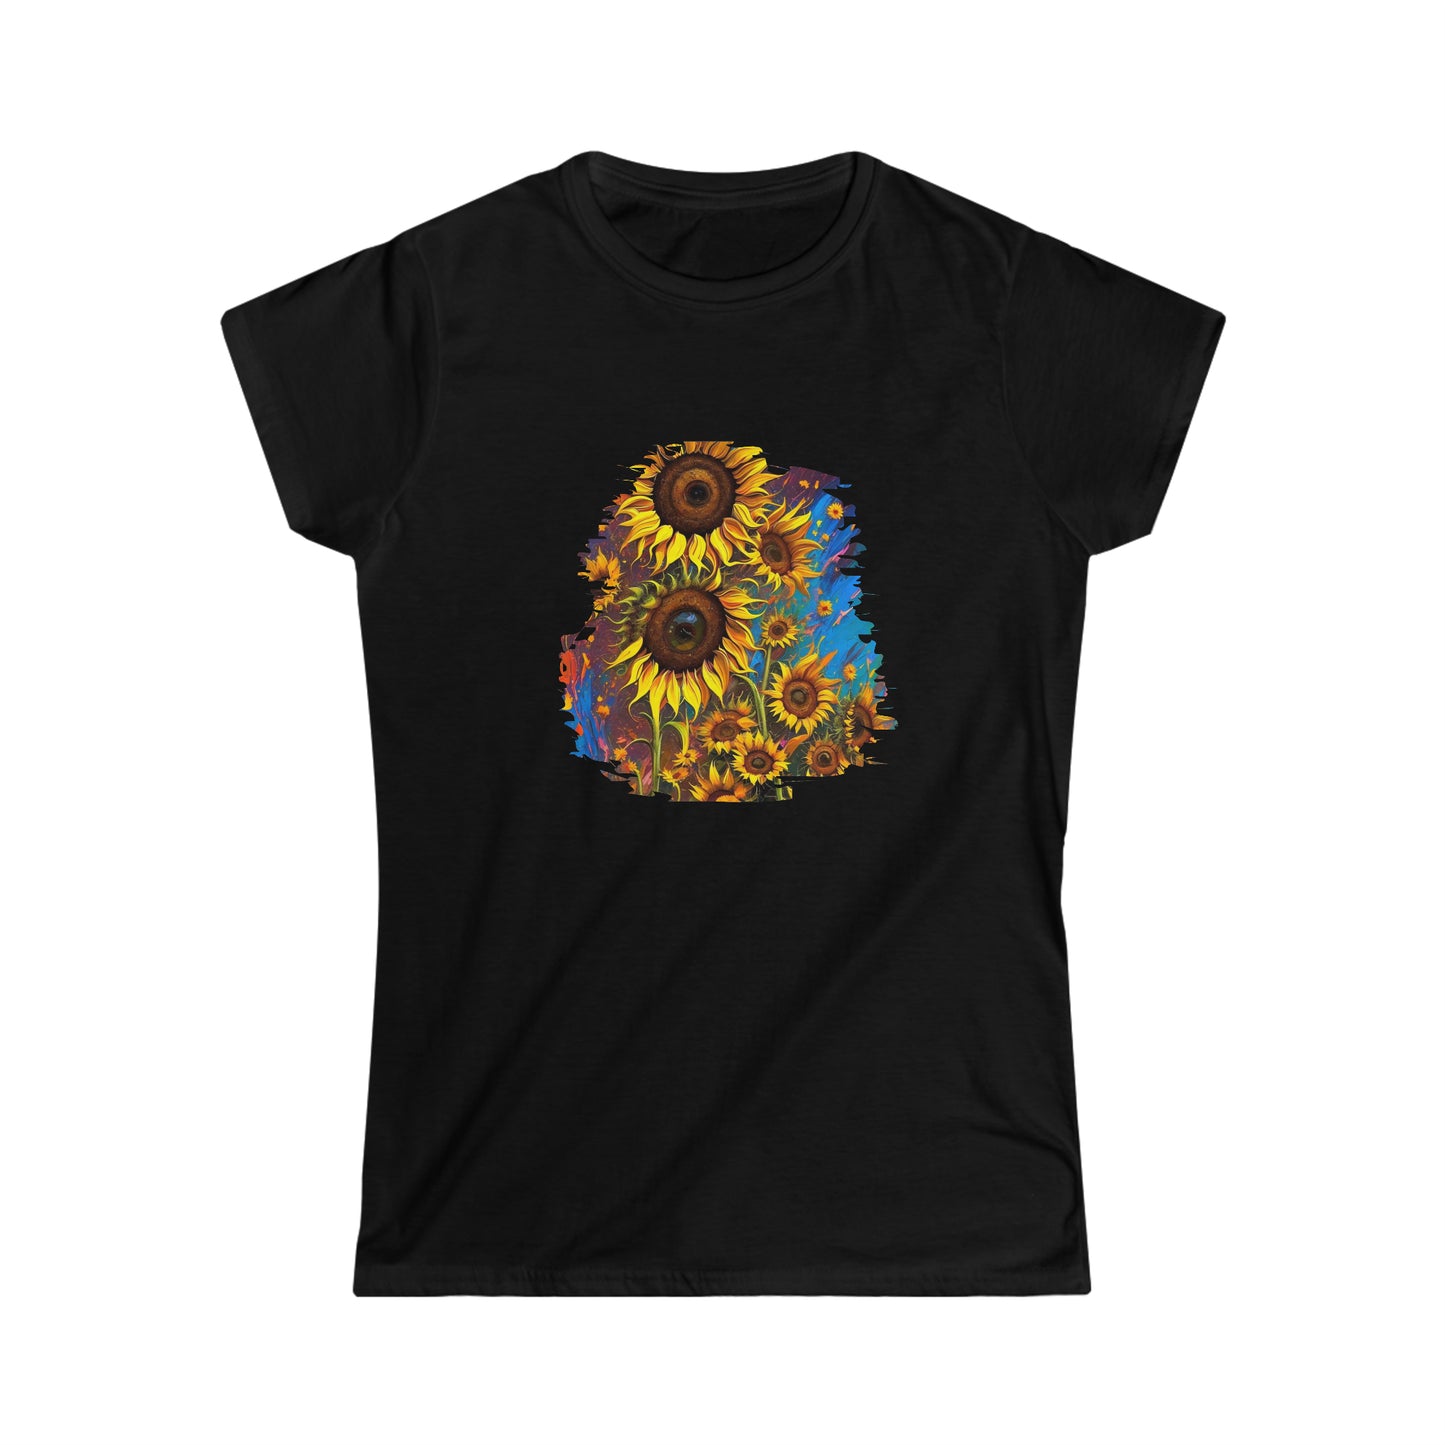 Women's Softstyle Tee - SUNFLOWERS - 12 SECONDS APPAREL